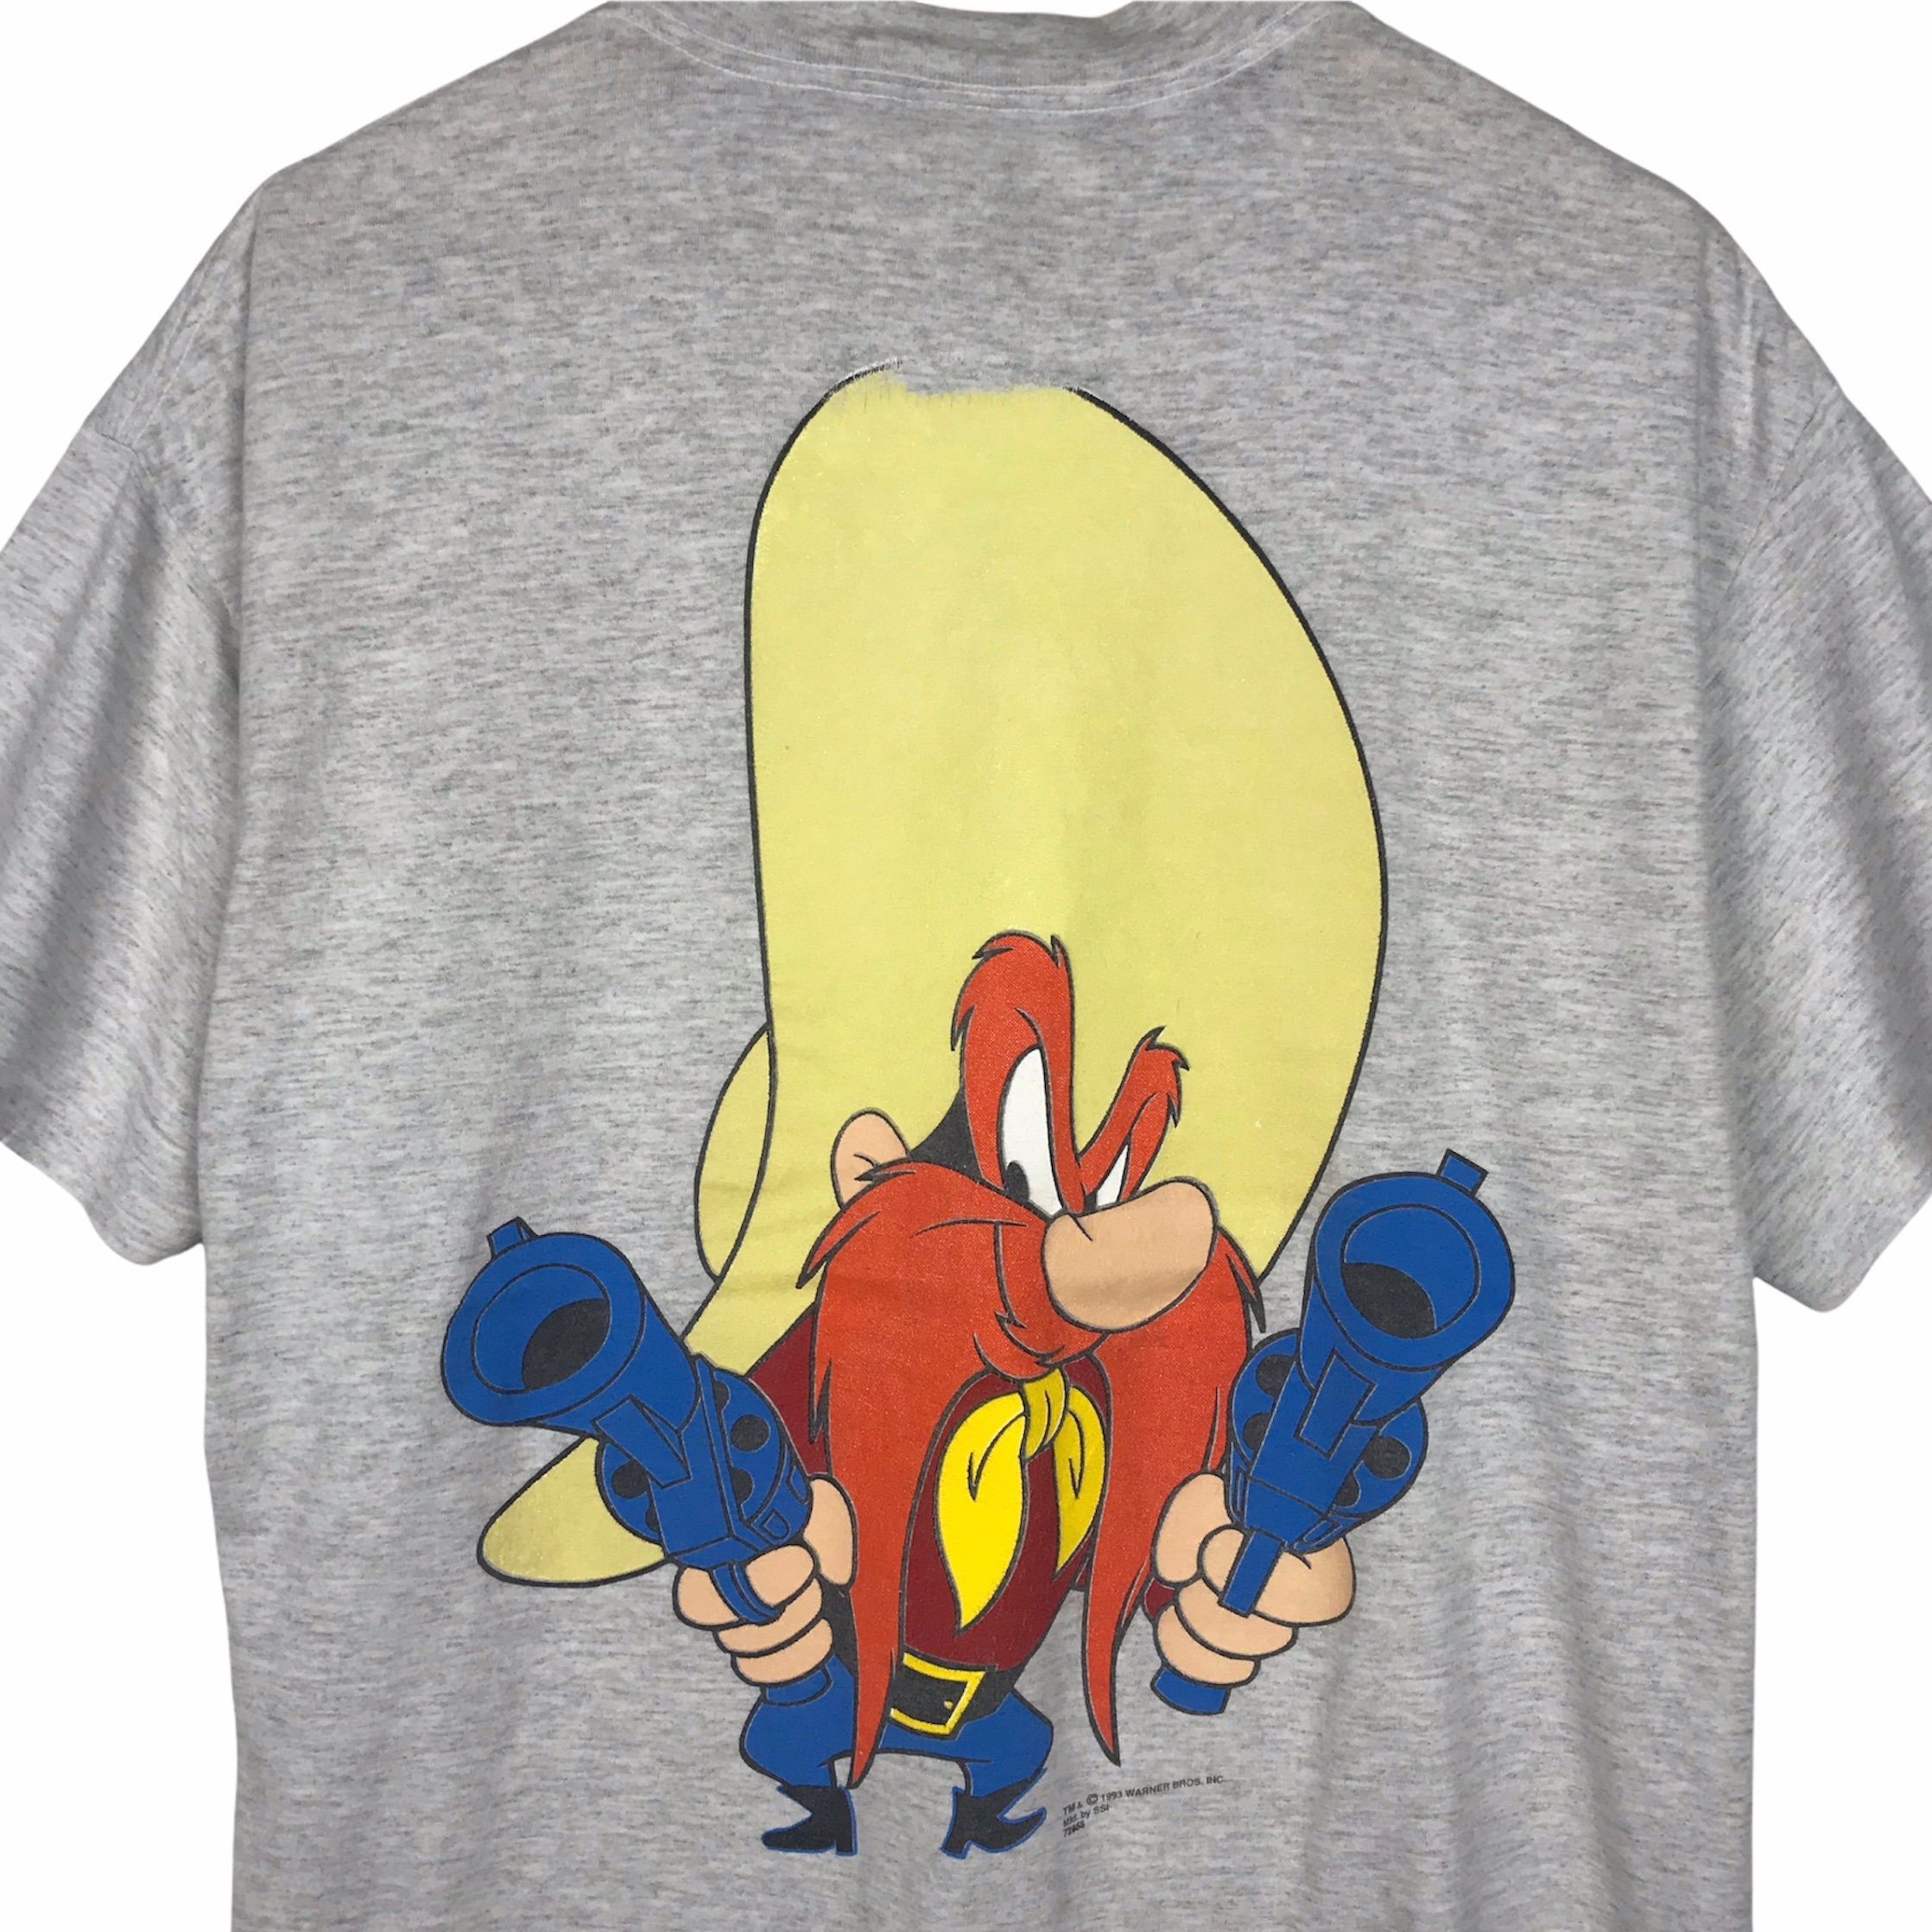 Looney Tunes Men's Characters In 90s Streetwear Graphic Design T-Shirt (LG)  